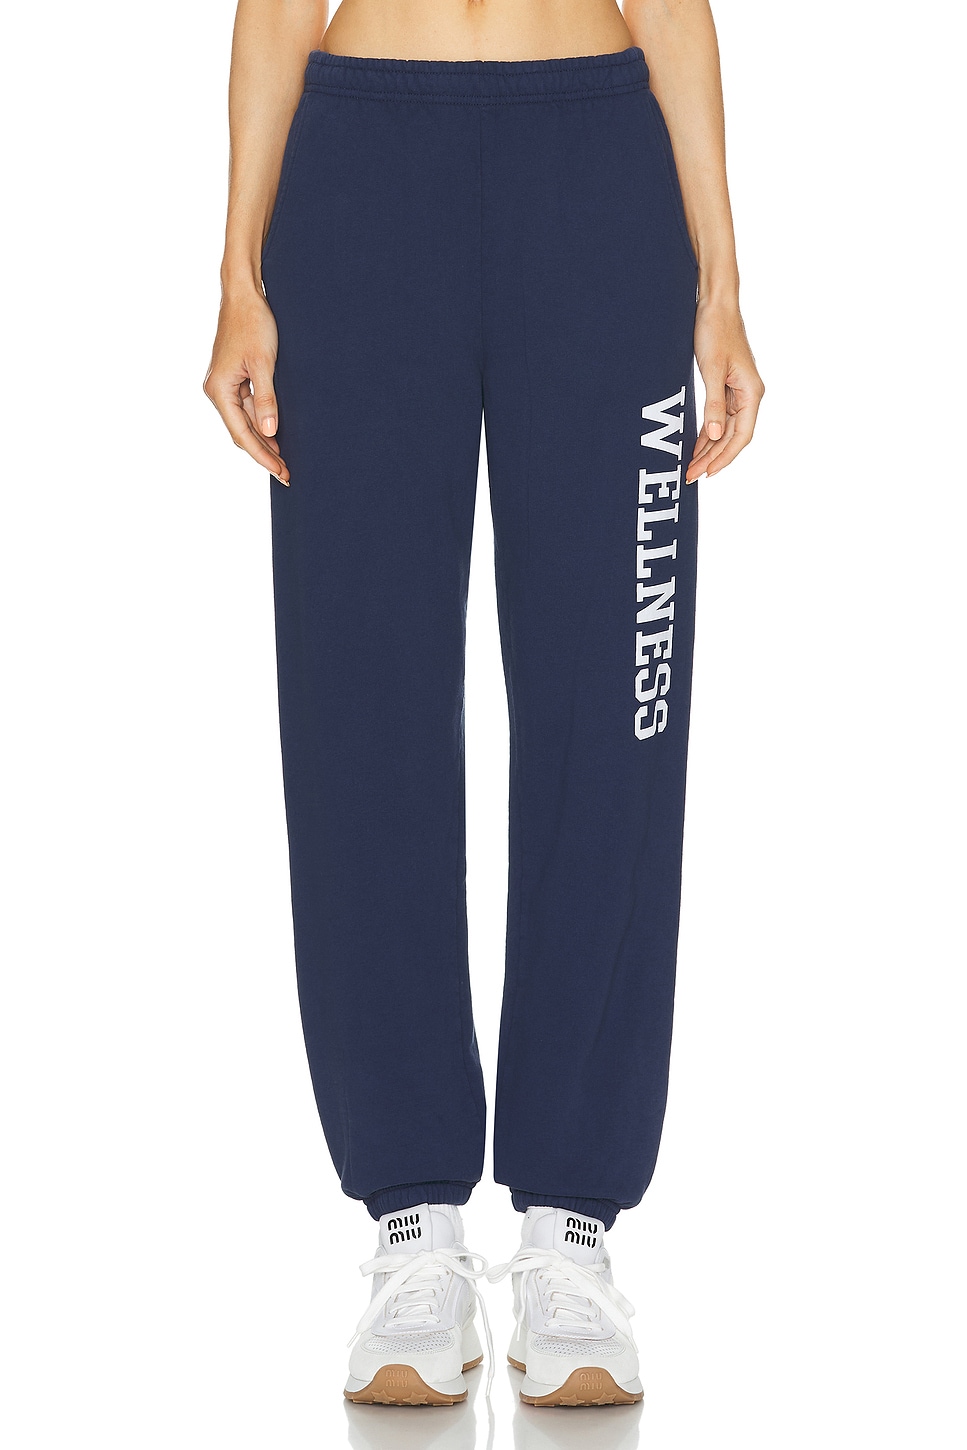 Wellness Ivy Sweatpant in Navy